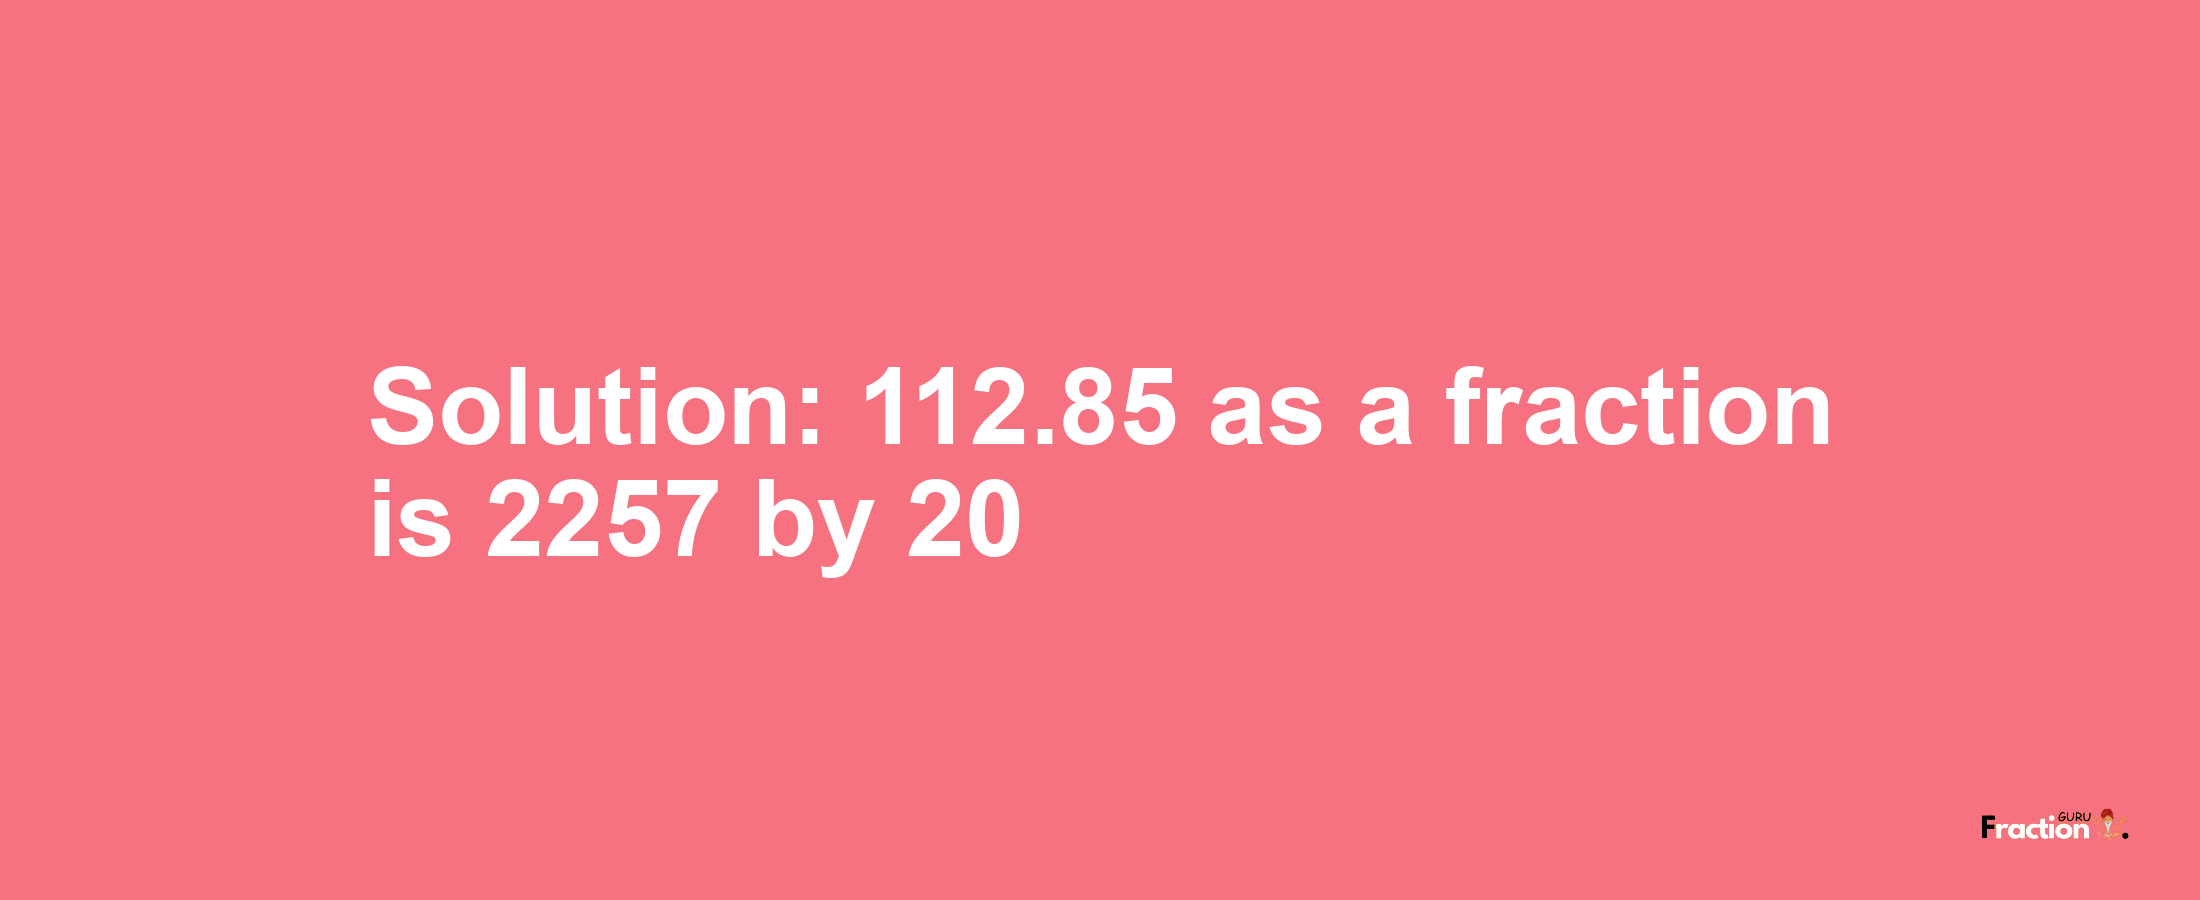 Solution:112.85 as a fraction is 2257/20